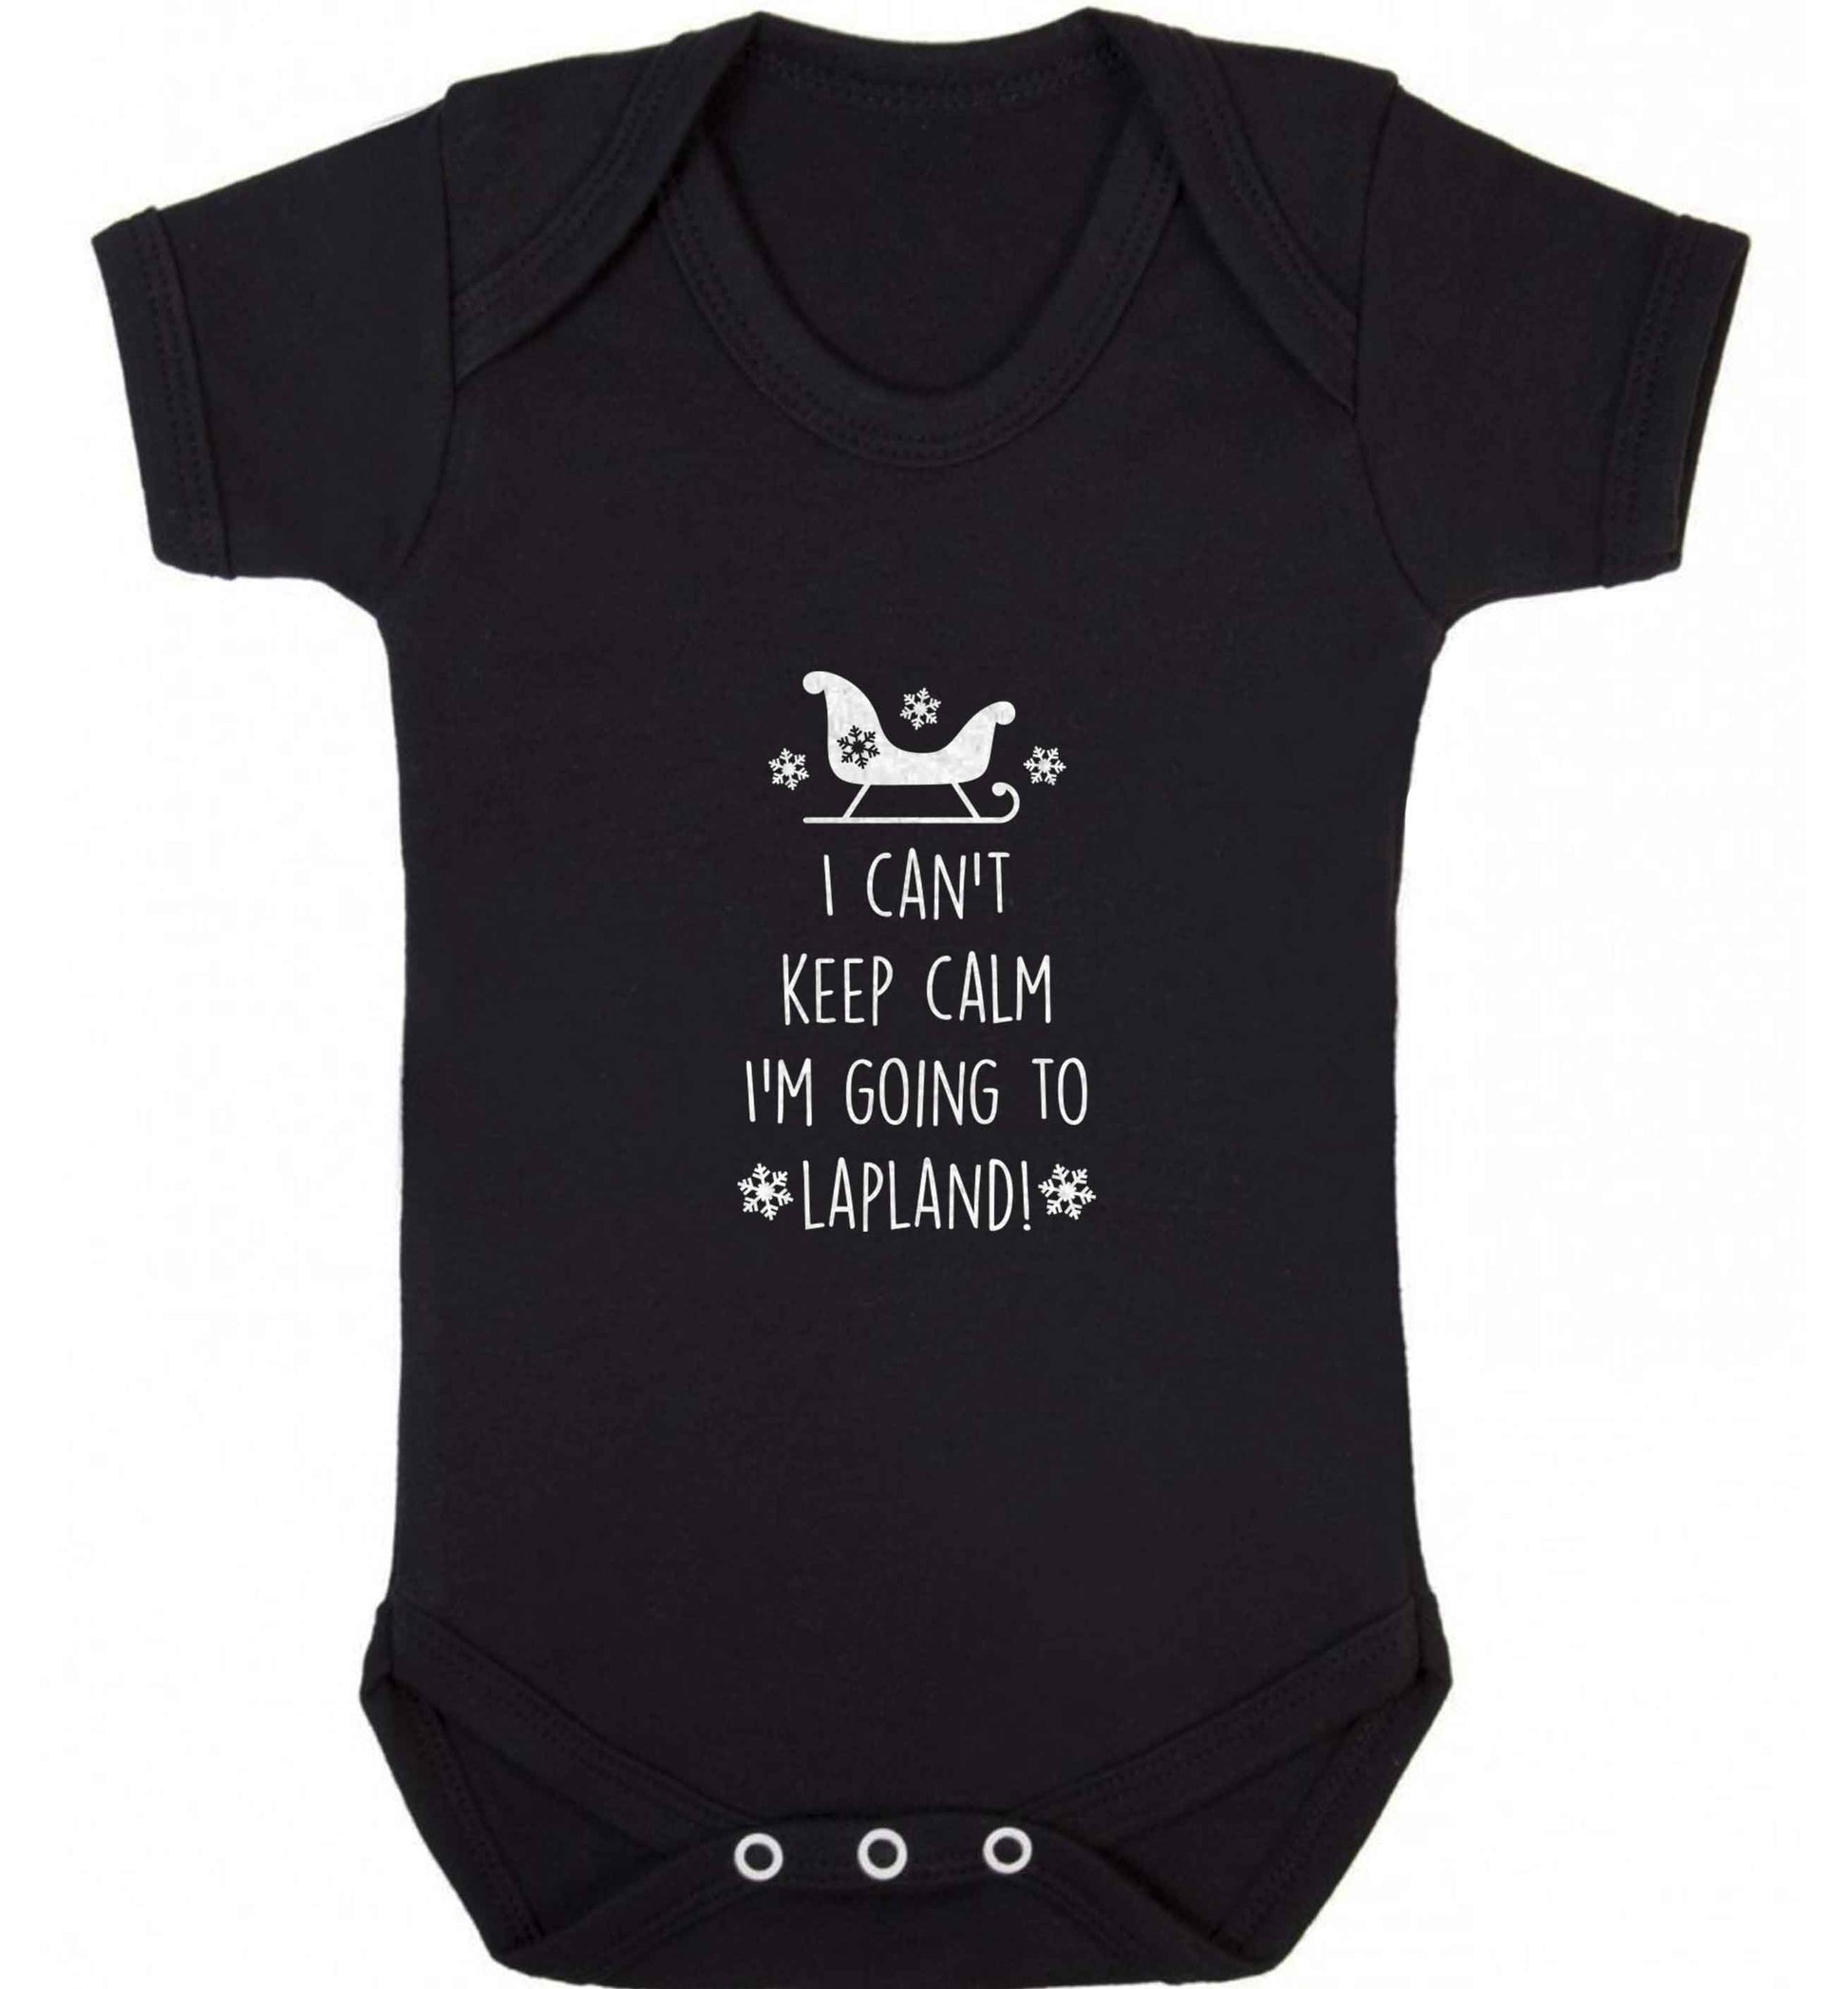 I can't keep calm I'm going to Lapland baby vest black 18-24 months